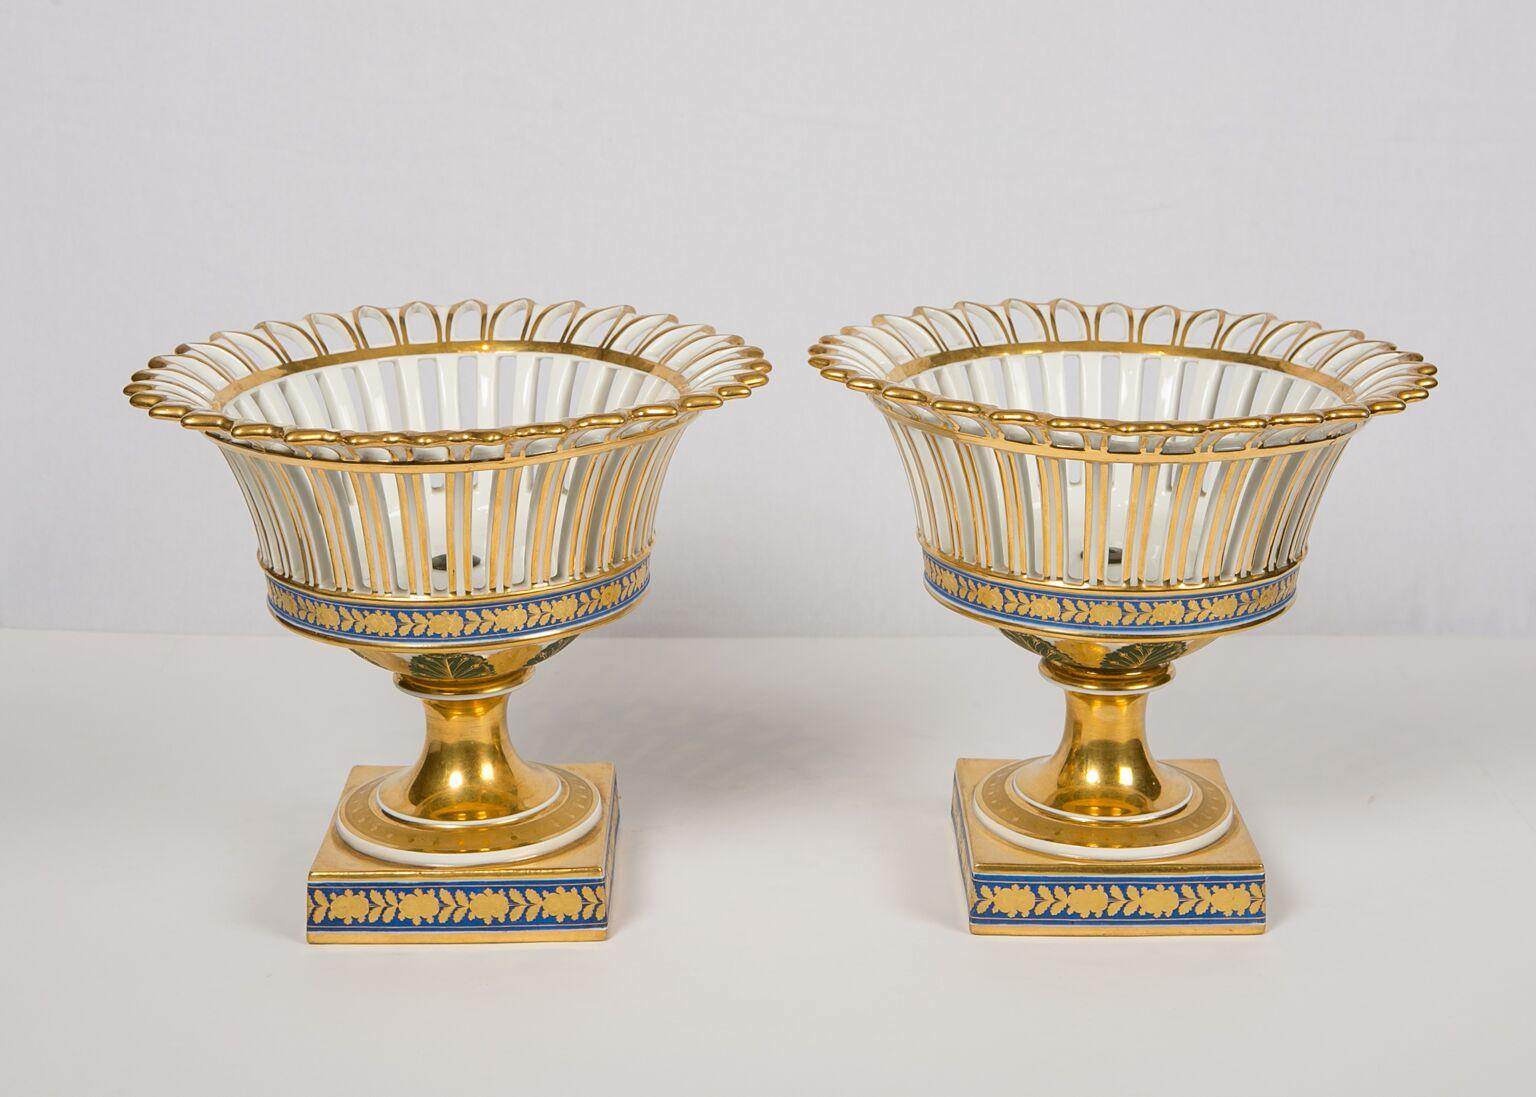 We are pleased to offer this elegant pair of Paris Porcelain gilded baskets. The decoration is lovely. The baskets are pierced and arcaded with everted rims. The gilding is lavish. The blue band along the bottom of each basket is decorated with